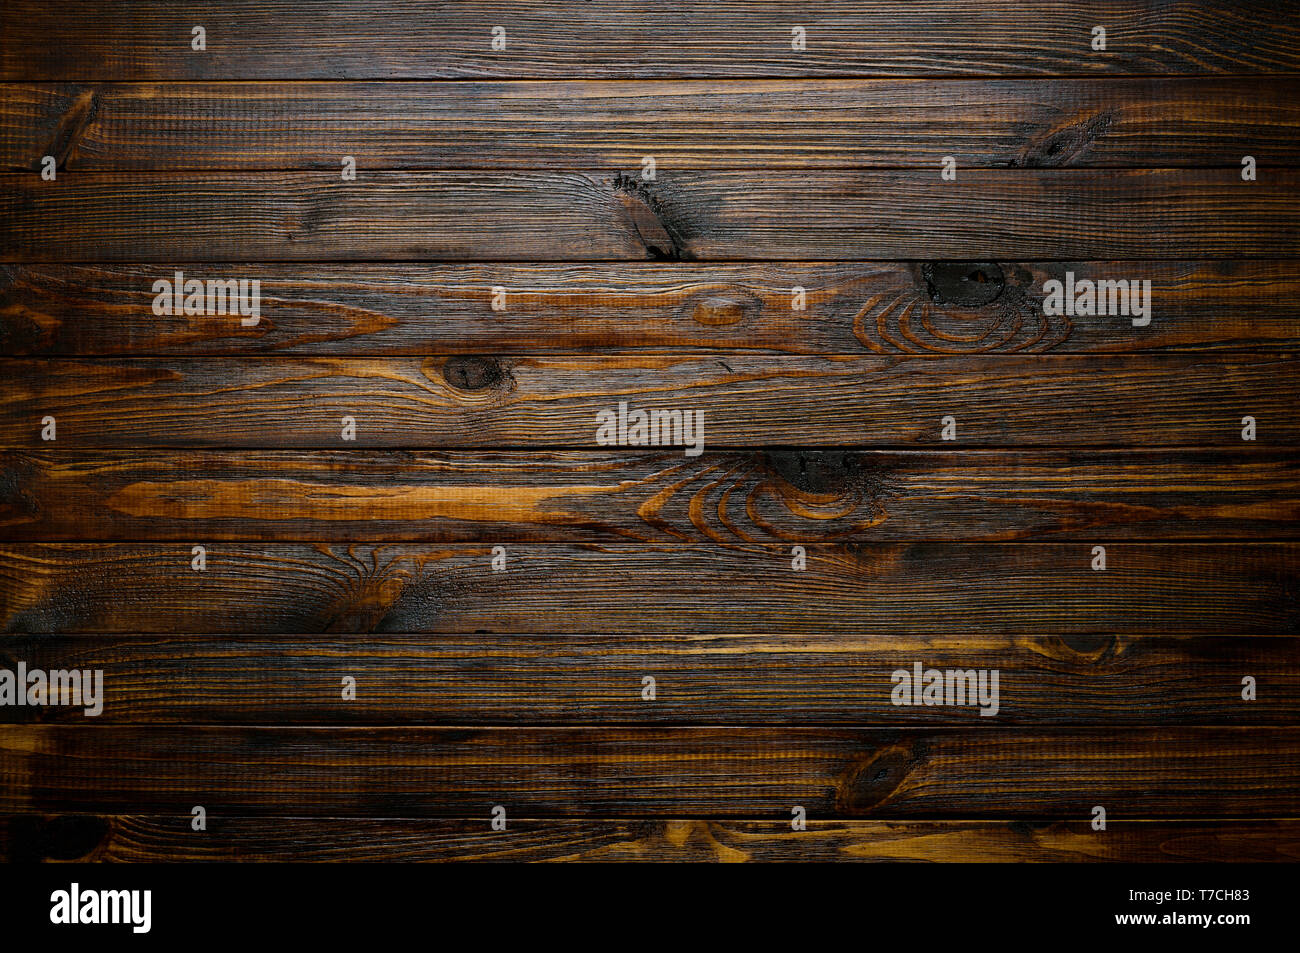 Natural wood texture. Wood background. Blank dark rustic planks table top flat lay view. Stock Photo